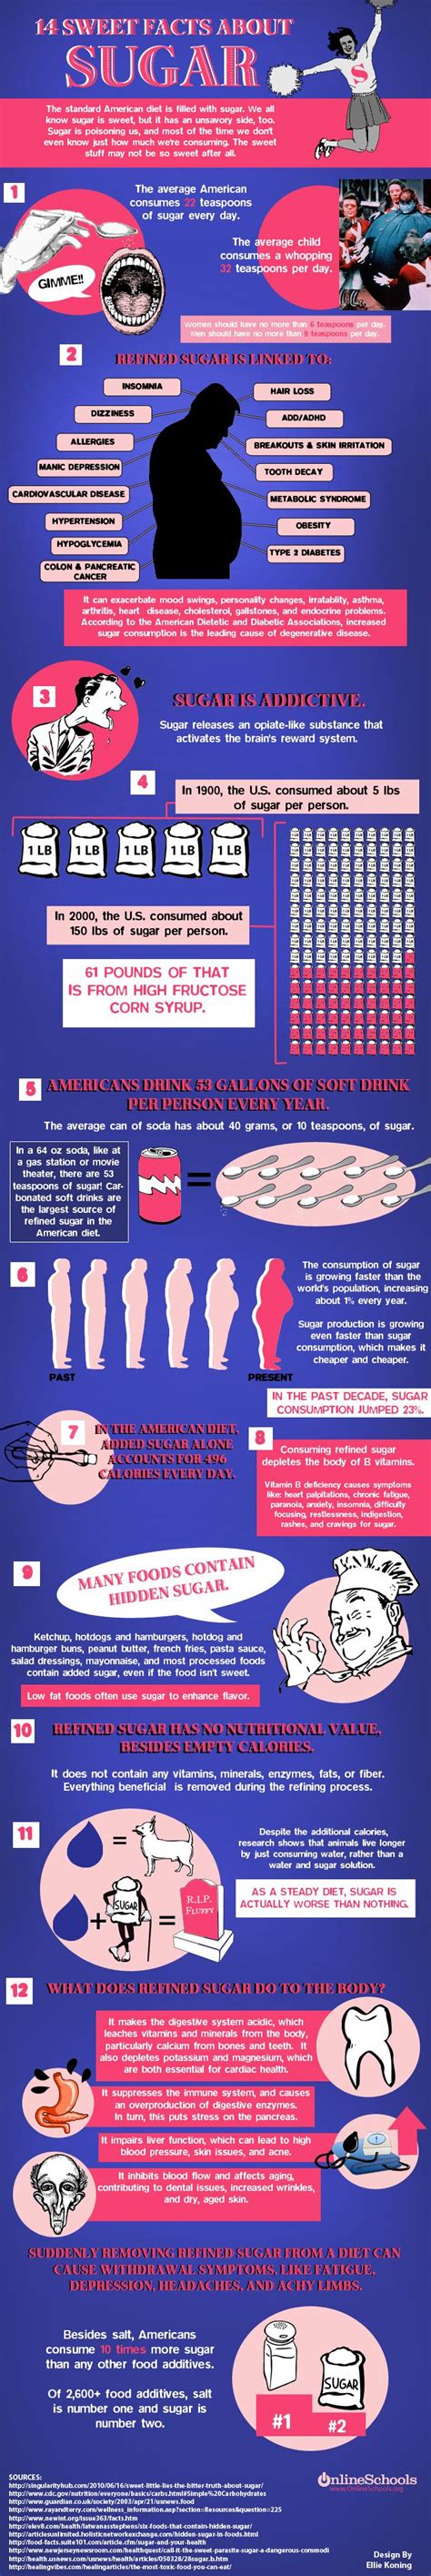 Facts About Sugar Infographic